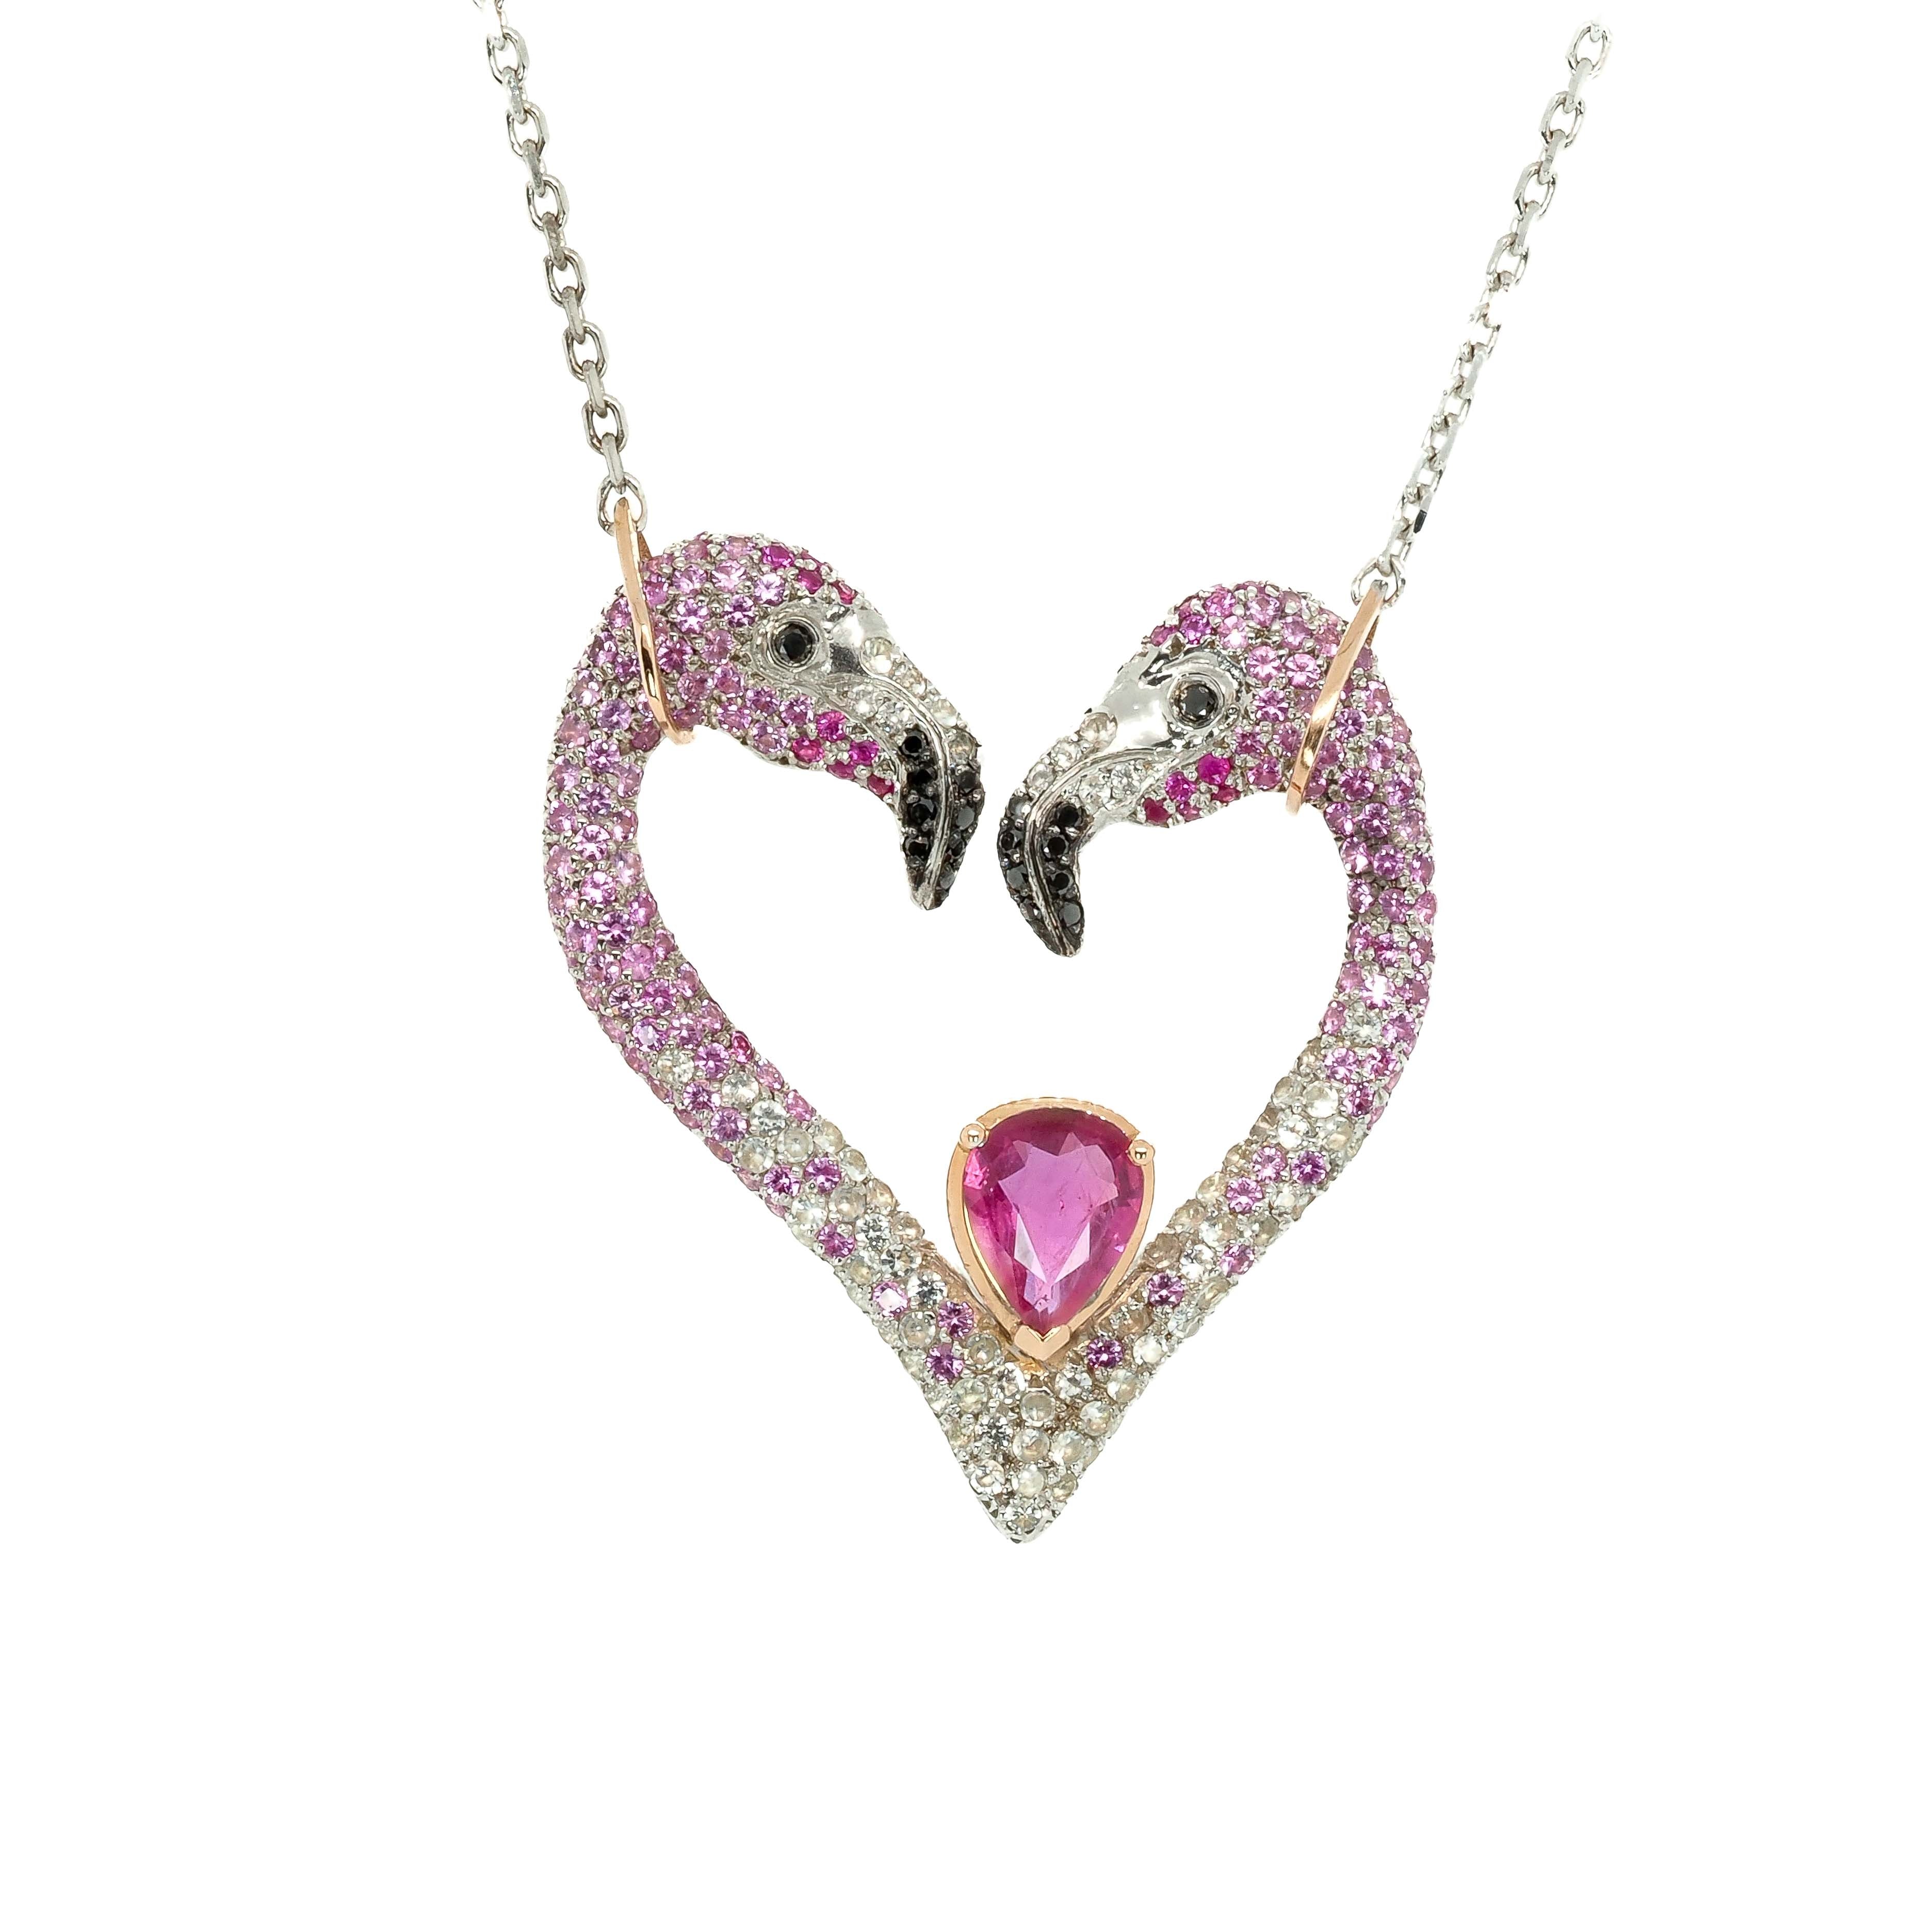 Taru Jewelry Flamingo Heart Necklace in 18K rose gold and sterling silver is a unique piece of jewelry. The design features two flamingos forming a heart shape, encrusted with pink and white sapphires and black diamonds.